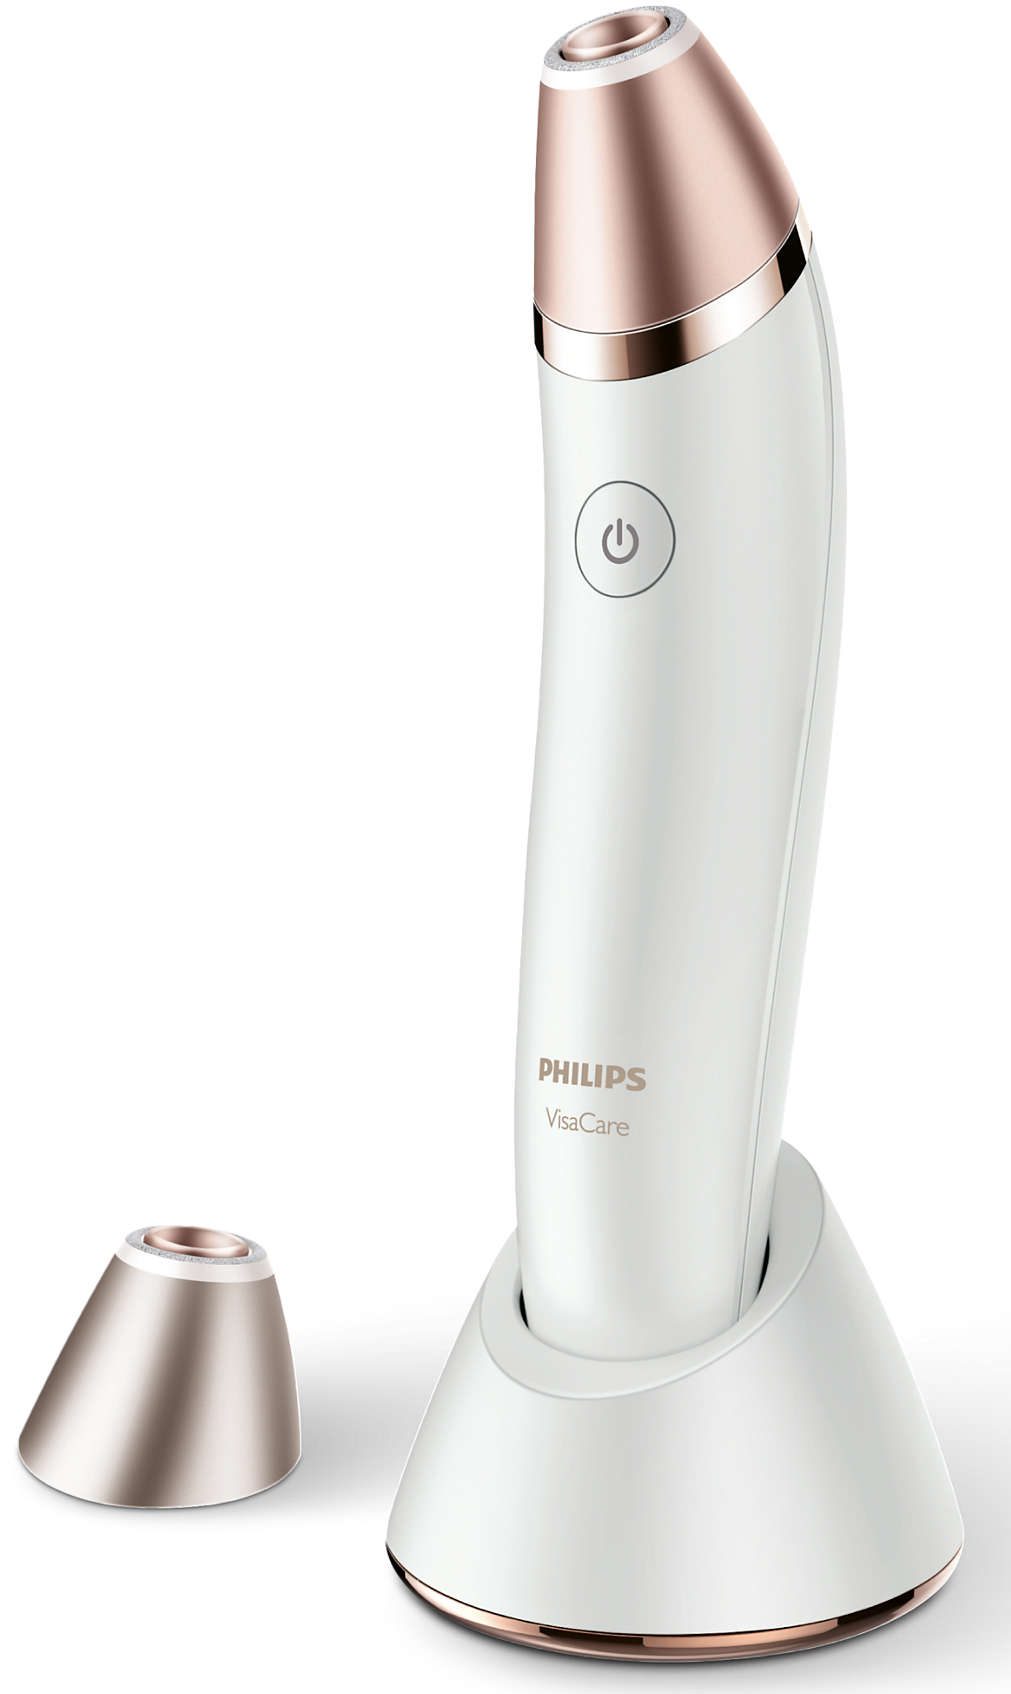 Get Firmer Skin Right At Home With The Philips VisaCare Microdermabrasion SC6240/01-Pamper.my